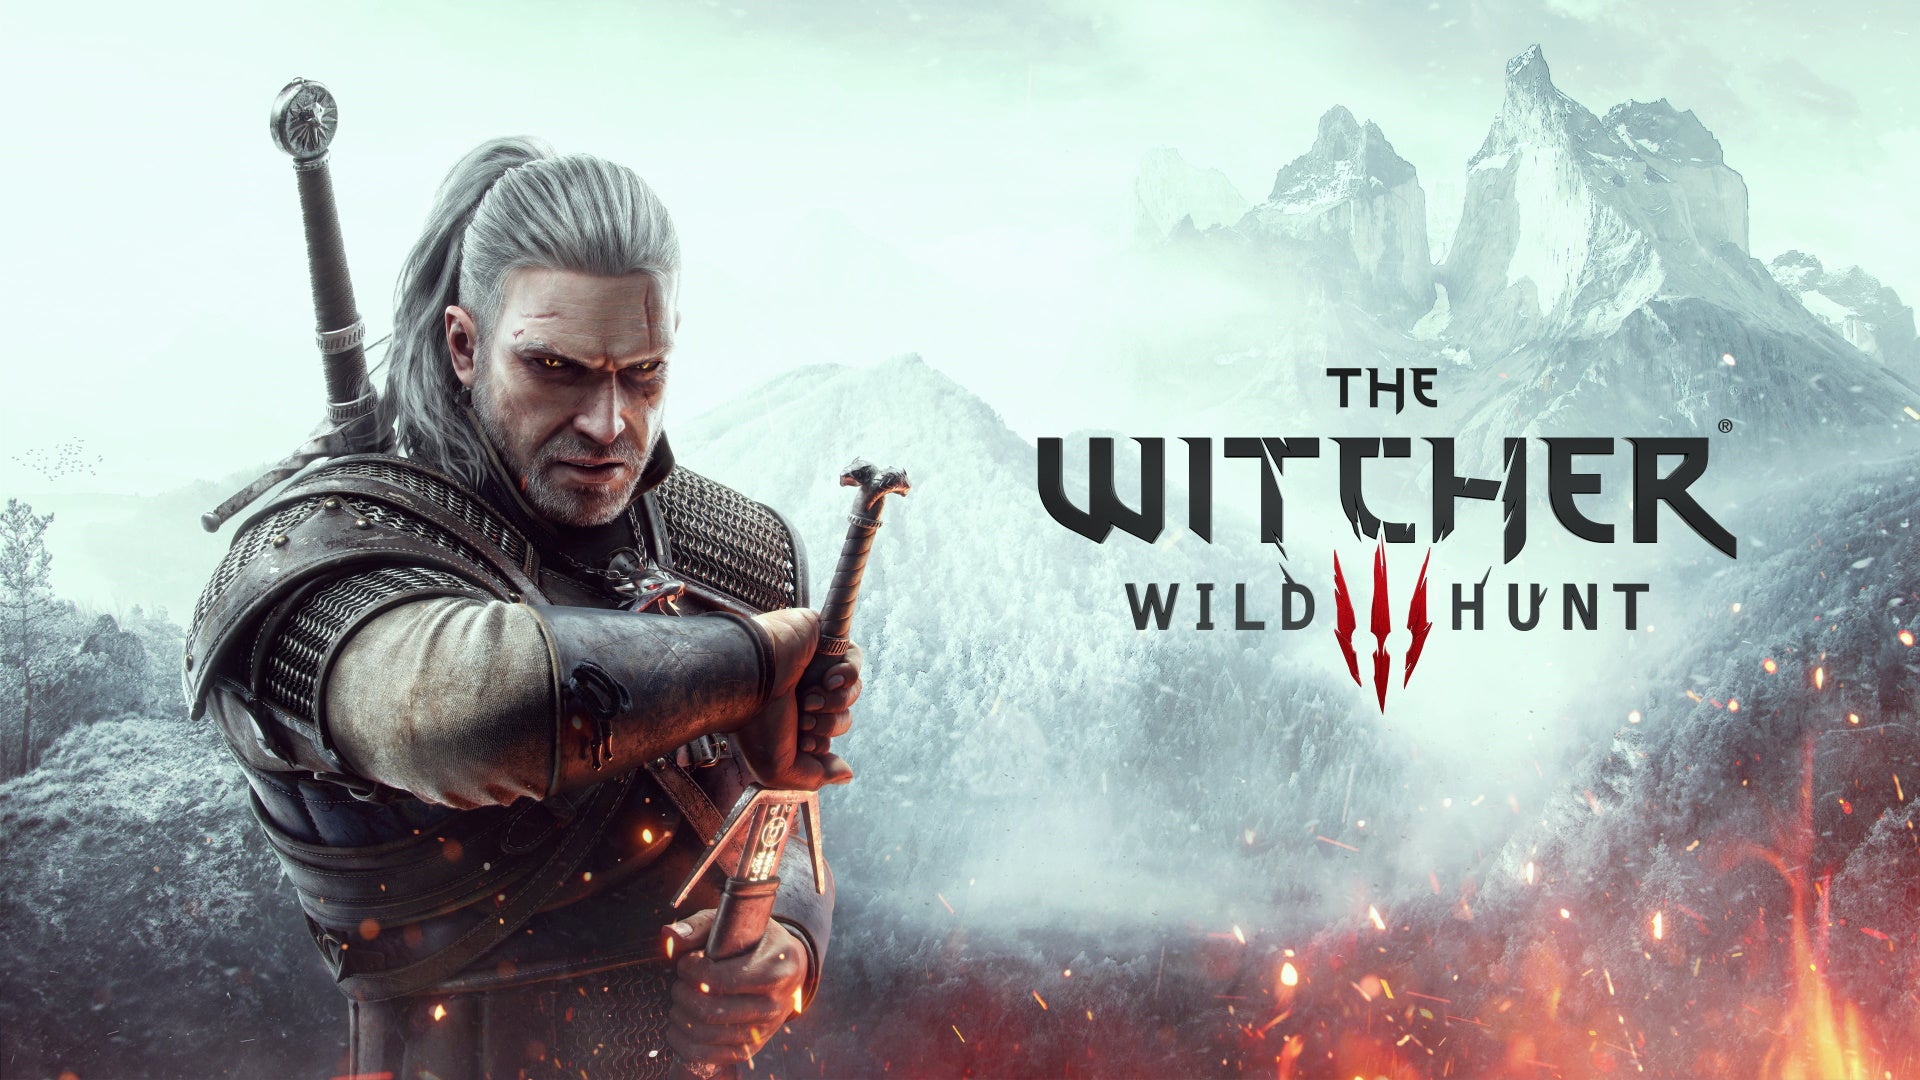 The Witcher 3 tips for beginners: A man with long silver hair, wearing plate armor, has his hand on a sword hilt. Behind him is a range of snow-covered mountains.